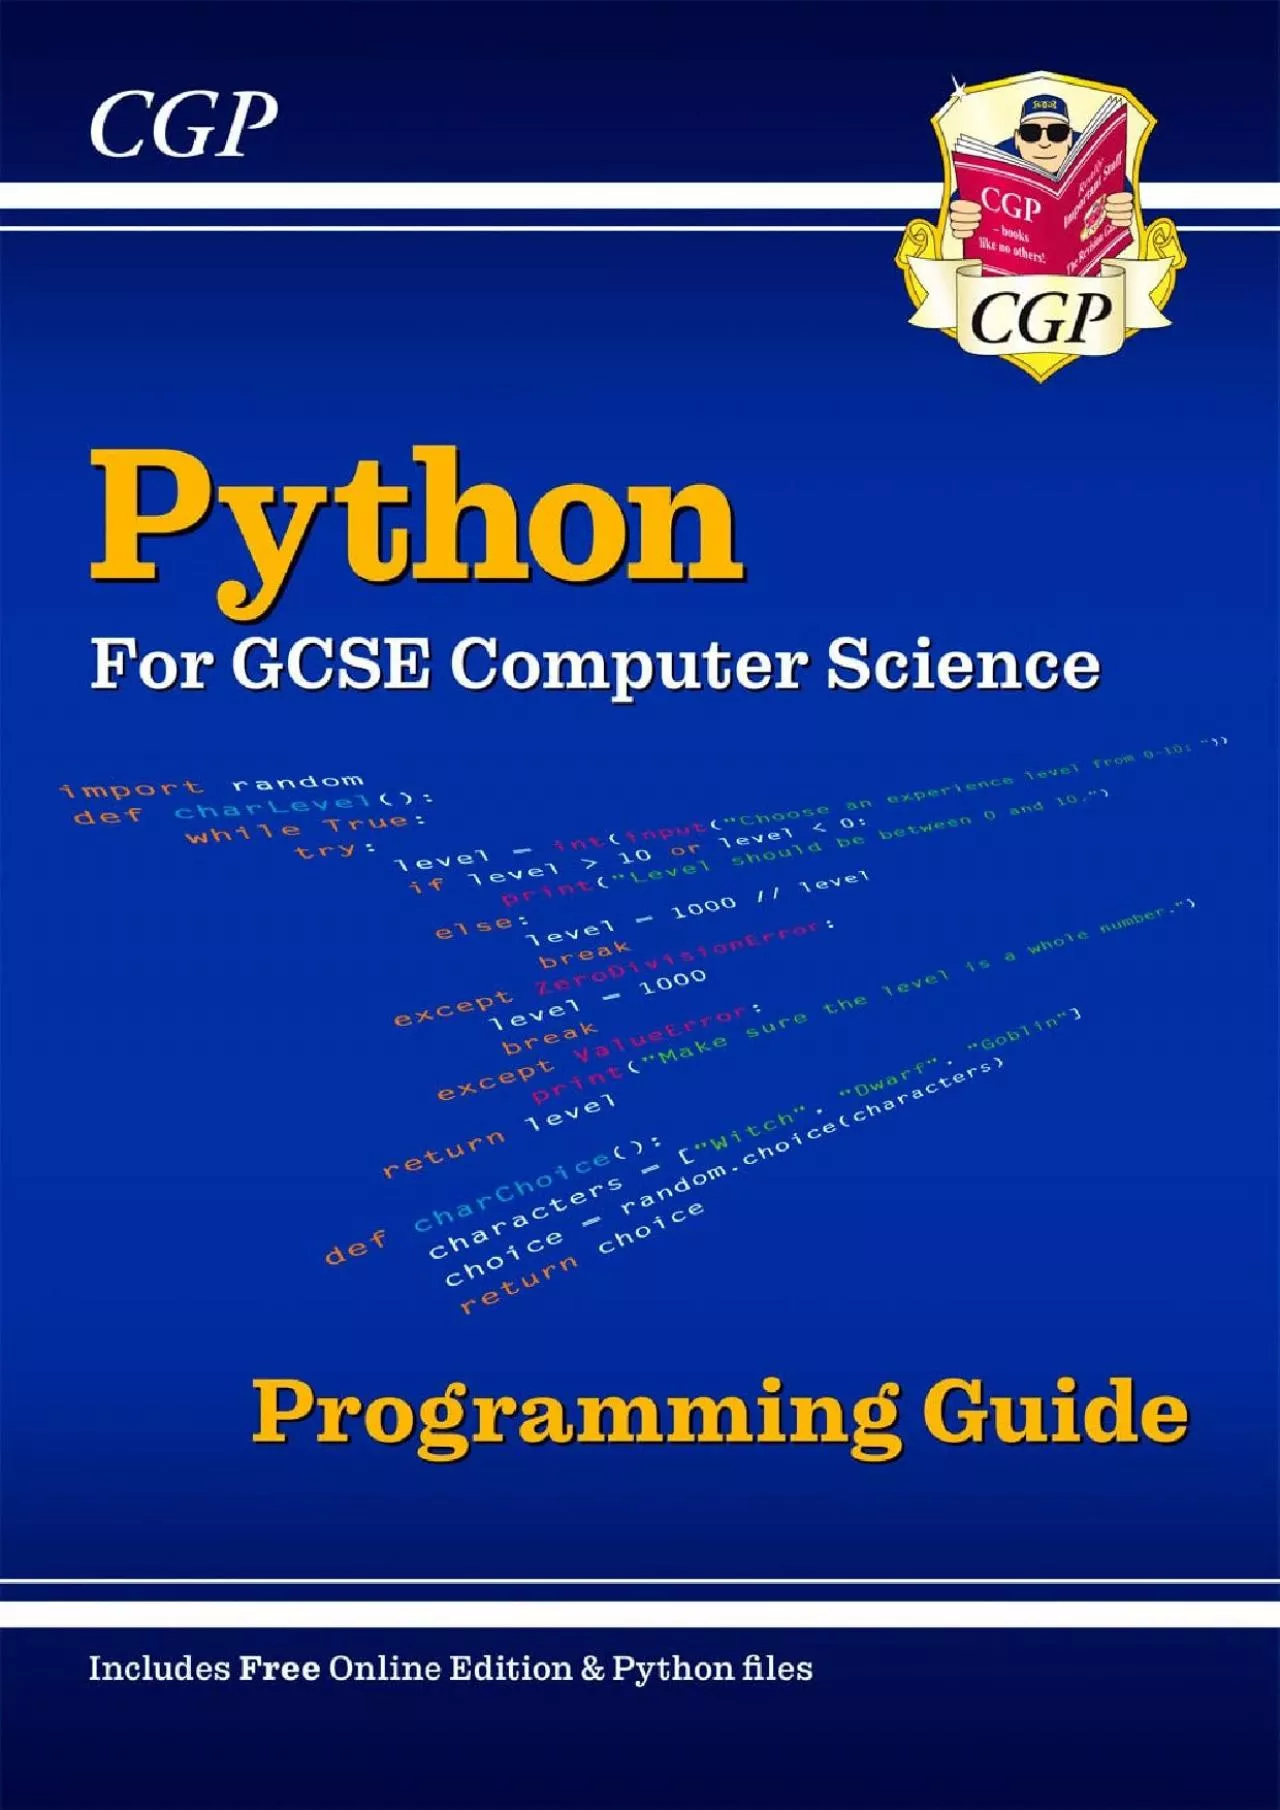 [BEST]-Python Programming Guide for GCSE Computer Science (includes Online Edition & Python